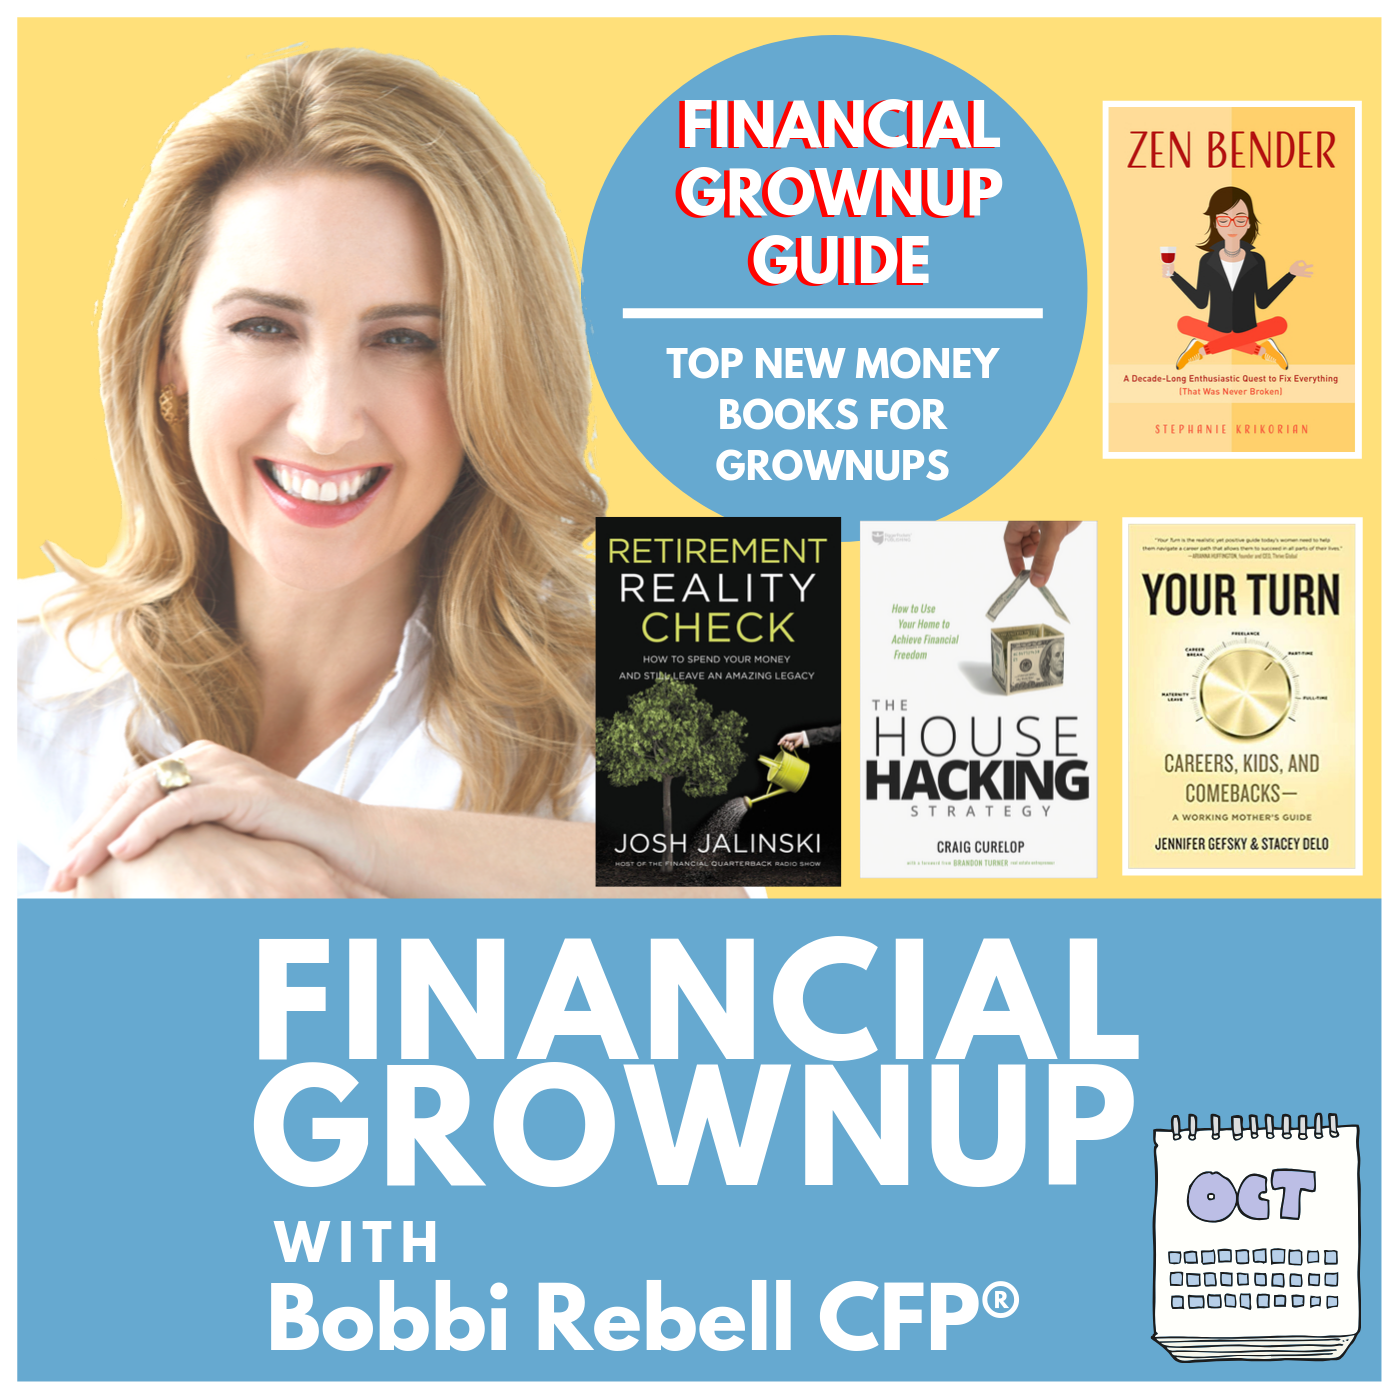 investing — Money Tips for Financial Grownups podcast show notes and transcripts Bobbi Rebell Financial Grownup + GrownupGear Bobbi Rebell CFP®